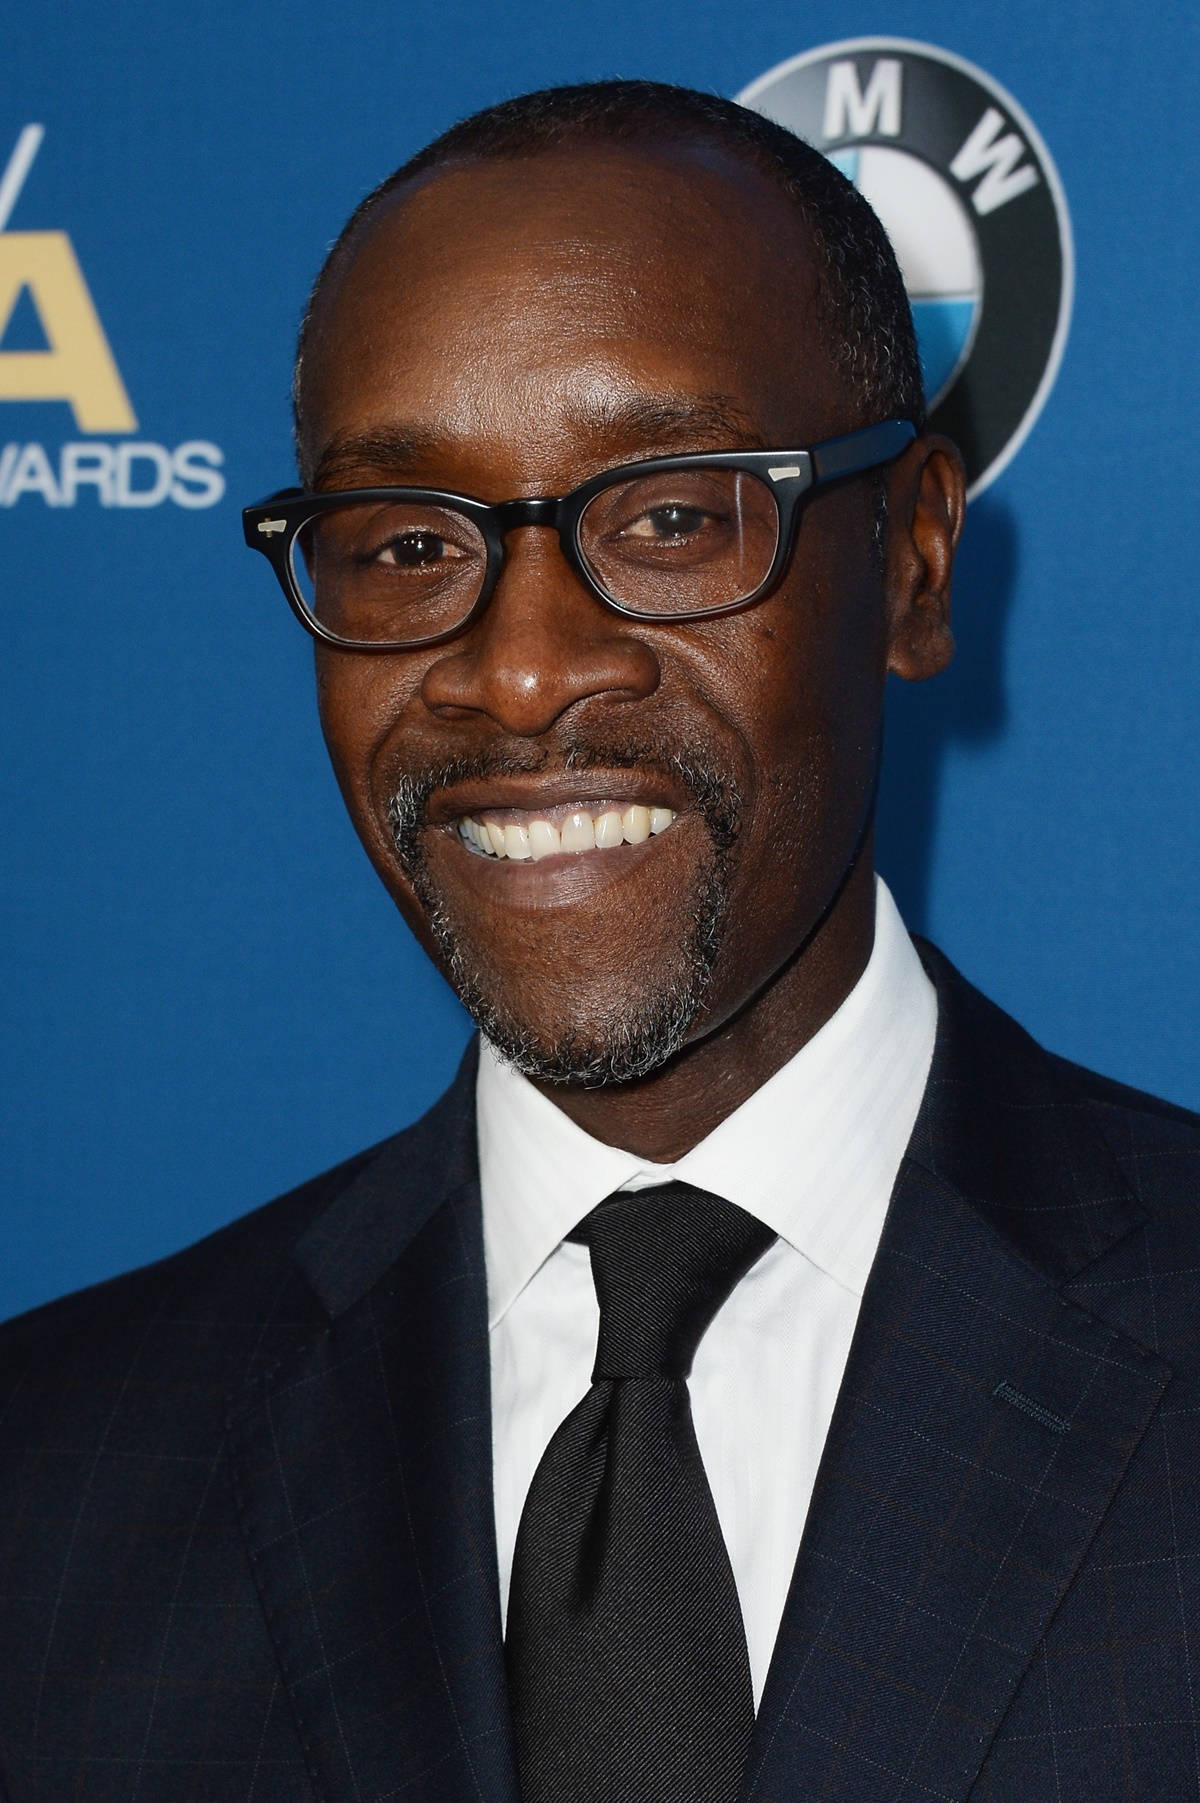 Doncheadle Nimmt An Crowdfunding Teil. Wallpaper